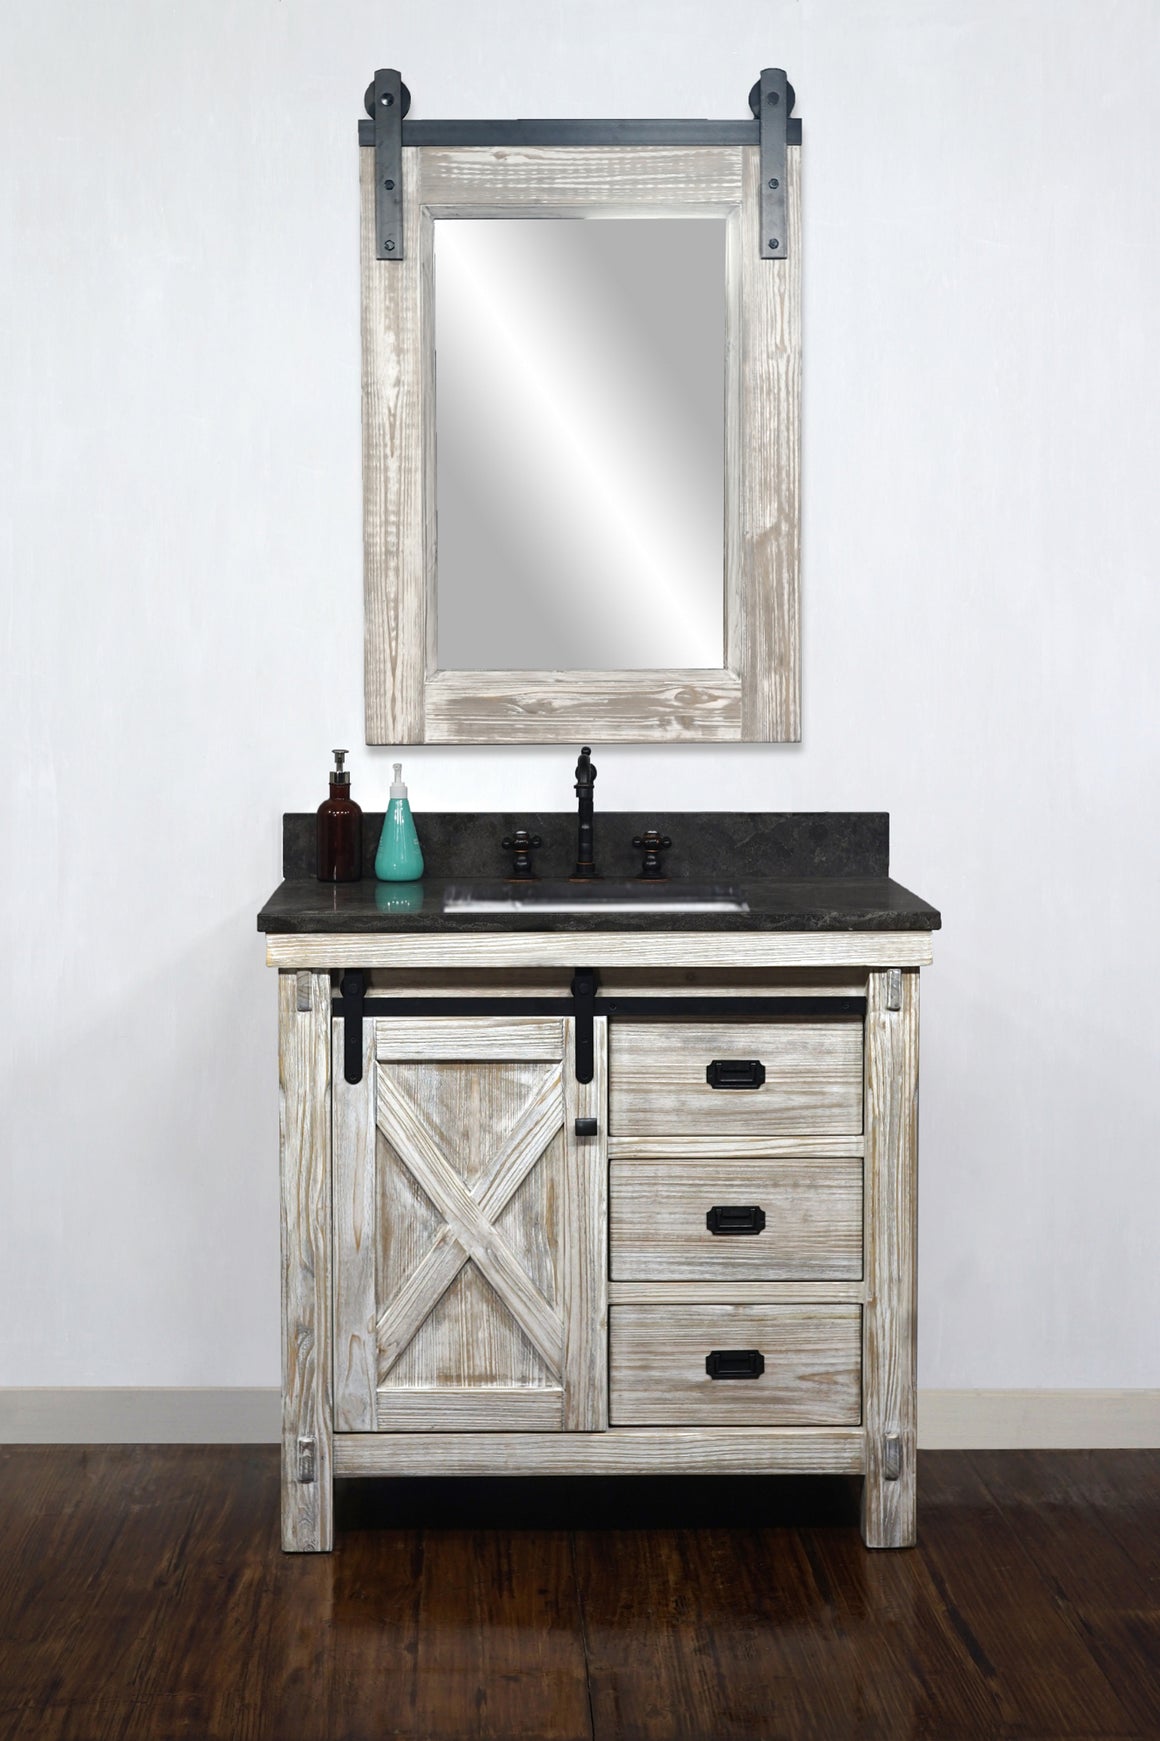 36"RUSTIC SOLID FIR BARN DOOR STYLE SINGLE SINK VANITY IN WHITE WASH WITH LIMESTONE TOP WITH RECTANGULAR SINK-NO FAUCET